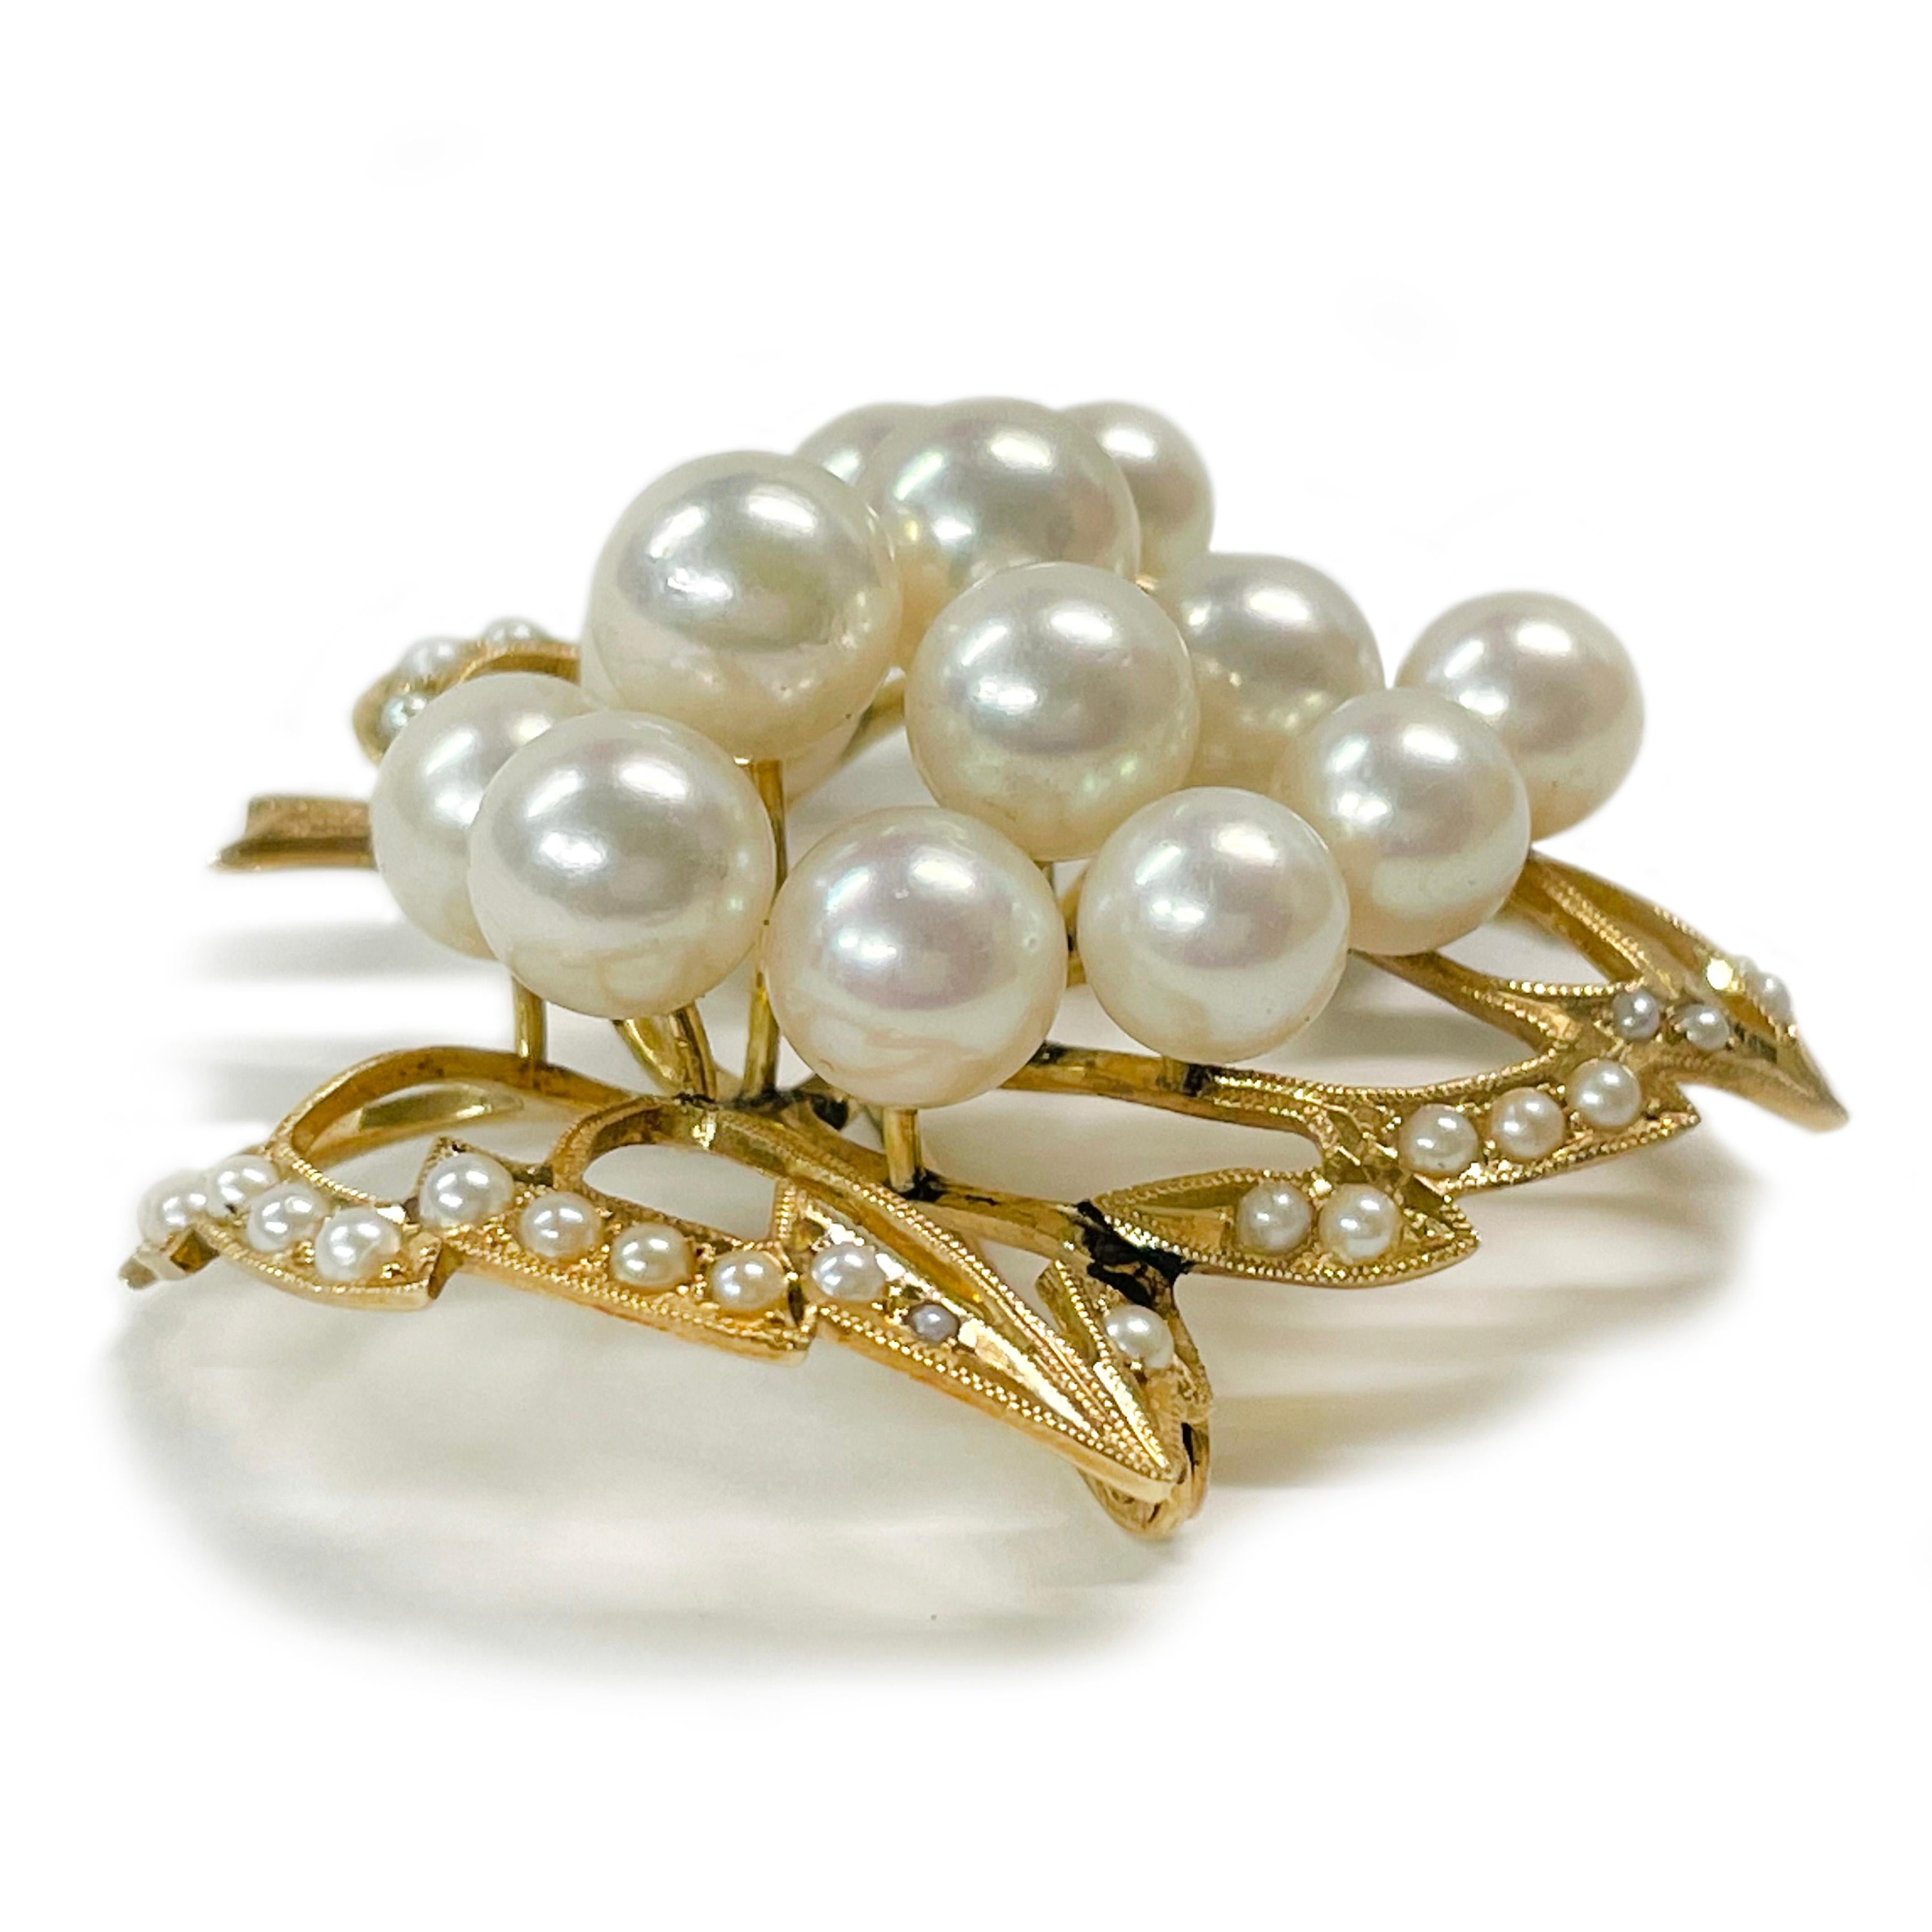 14 Karat Yellow Gold Pearl Cluster Leaf Brooch. This brooch features thirteen 6.5 and 7mm cultured pearls. The pearls are white with pinkish tones and they have good clean luster with only light blemishes. The pearls are set atop a gold leaf outline